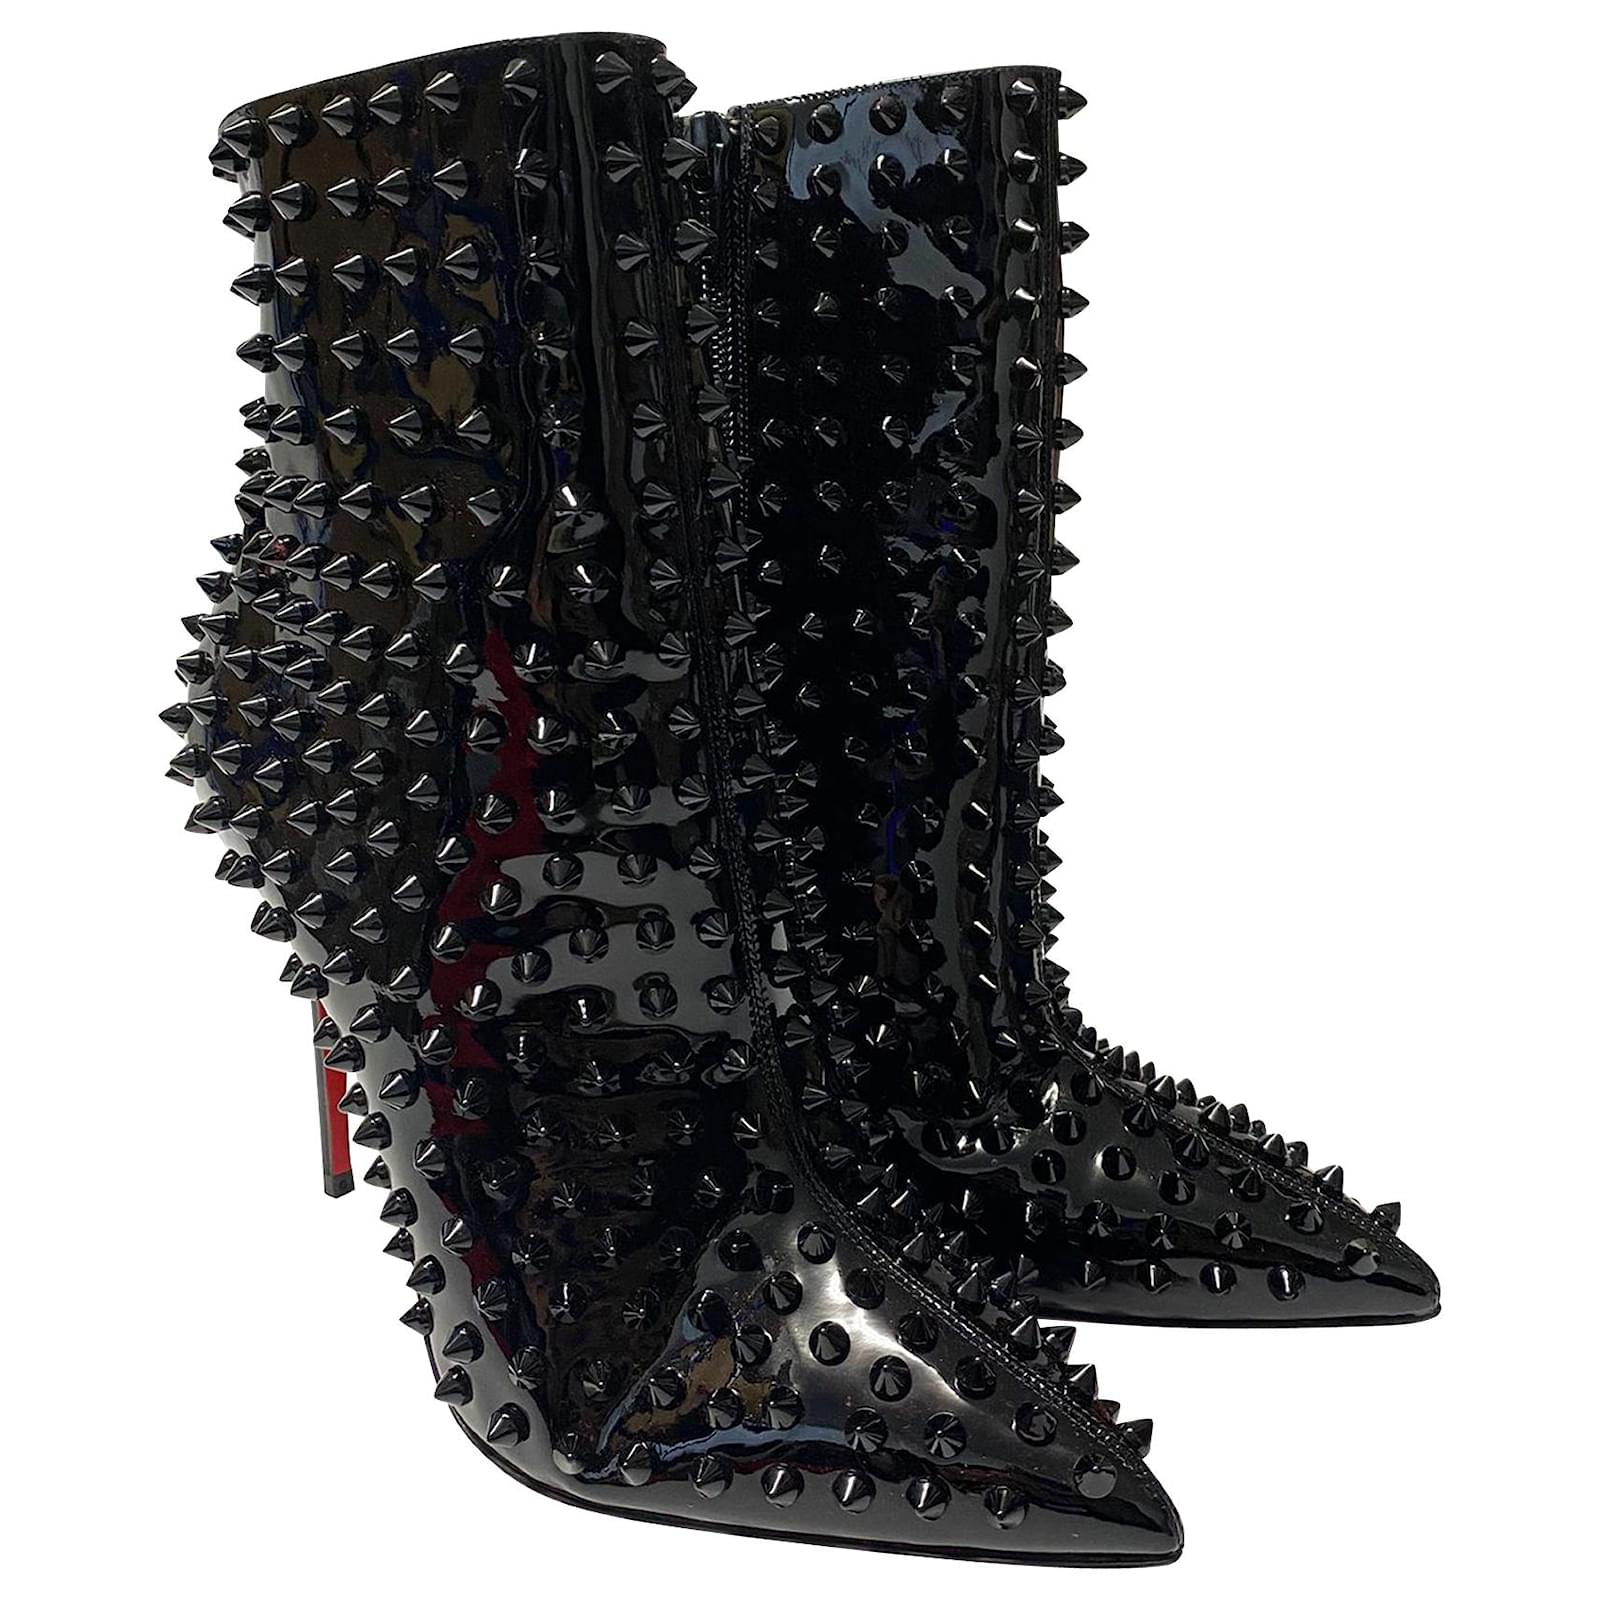 Christian Louboutin Snakilta Spiked Leather Ankle Boots in Black